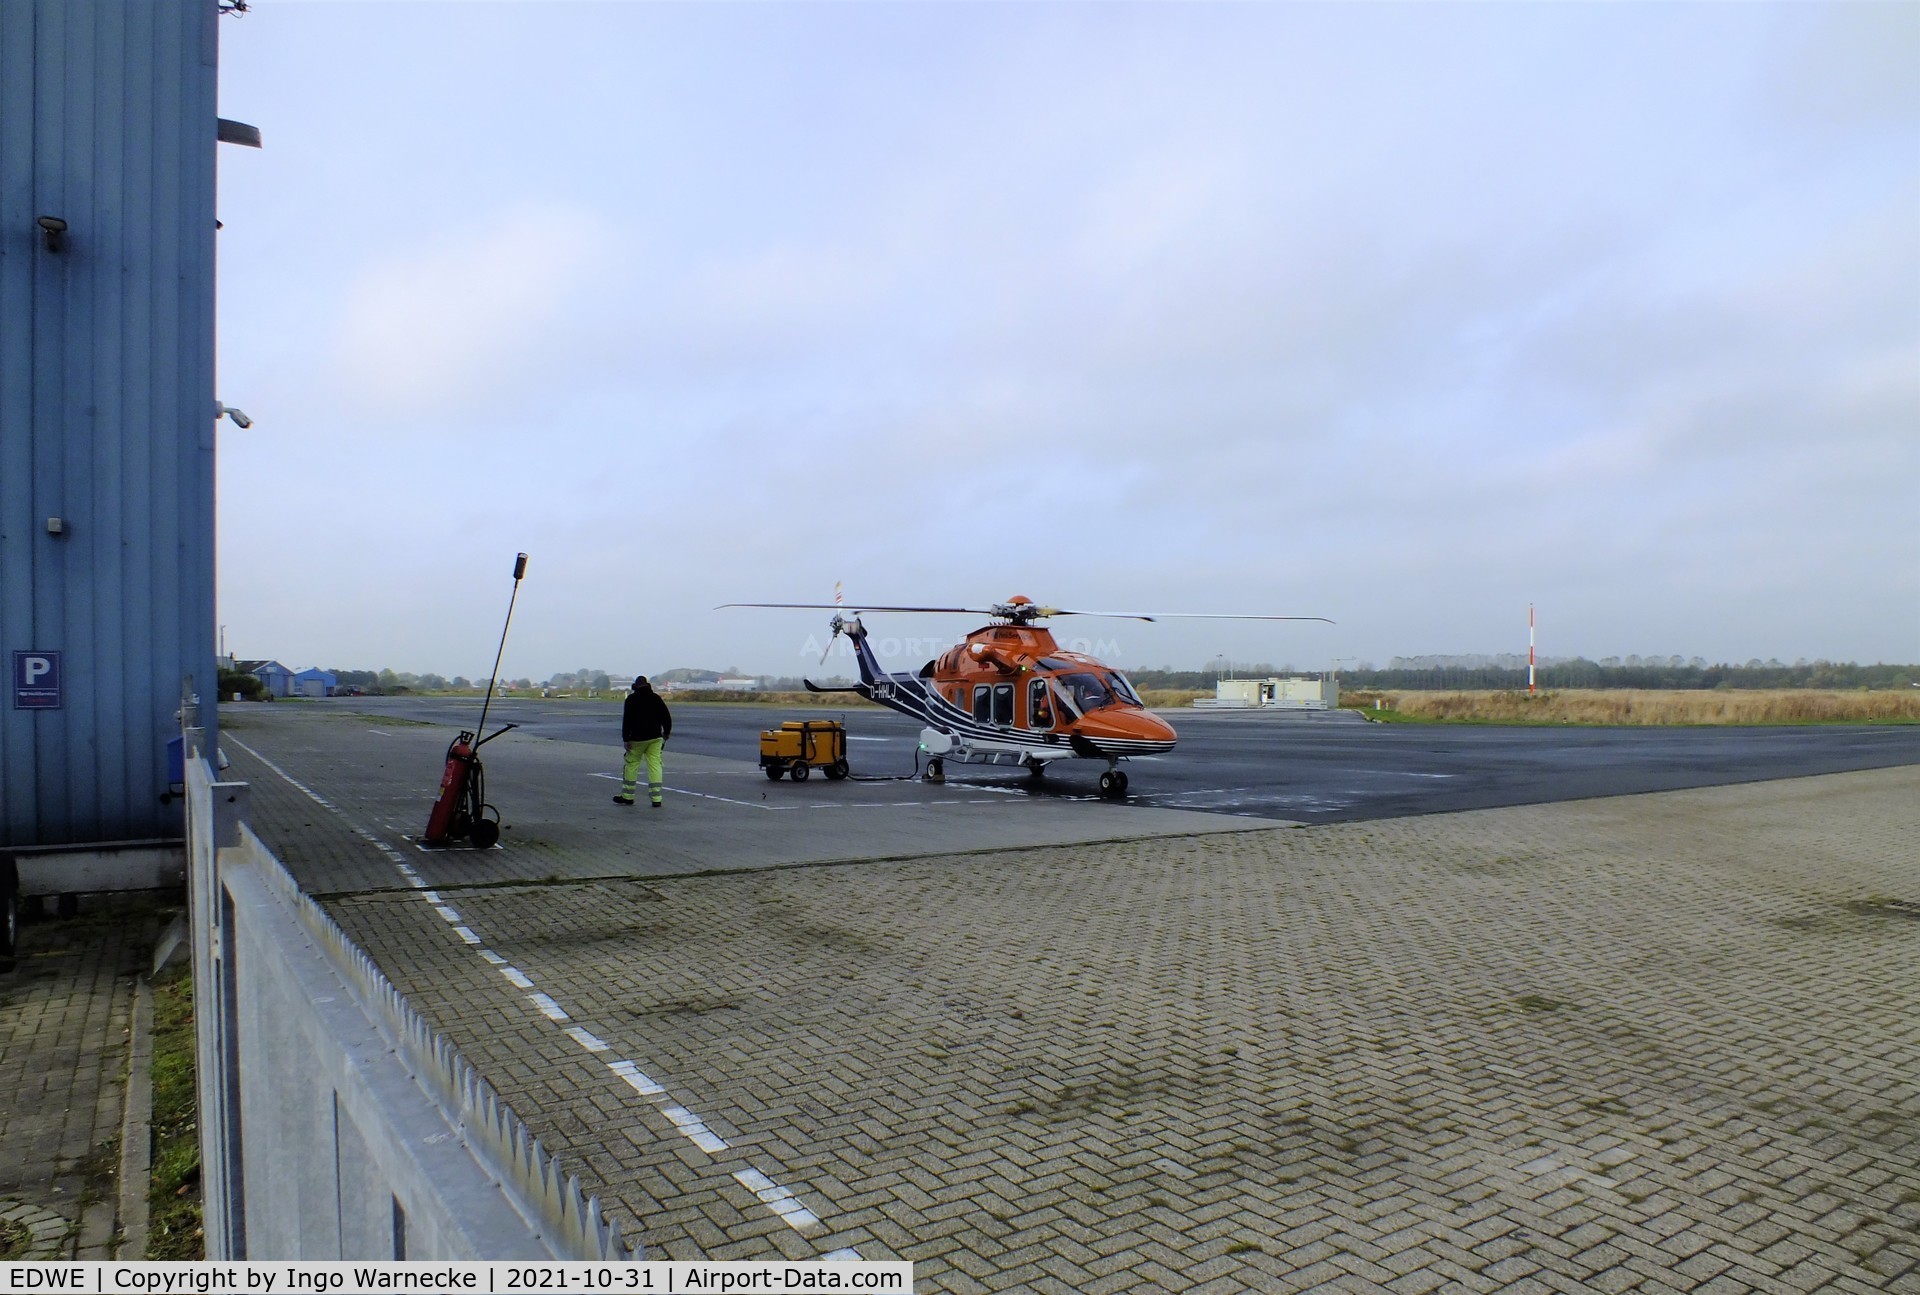 EDWE Airport - apron east of the tower at Emden airfield